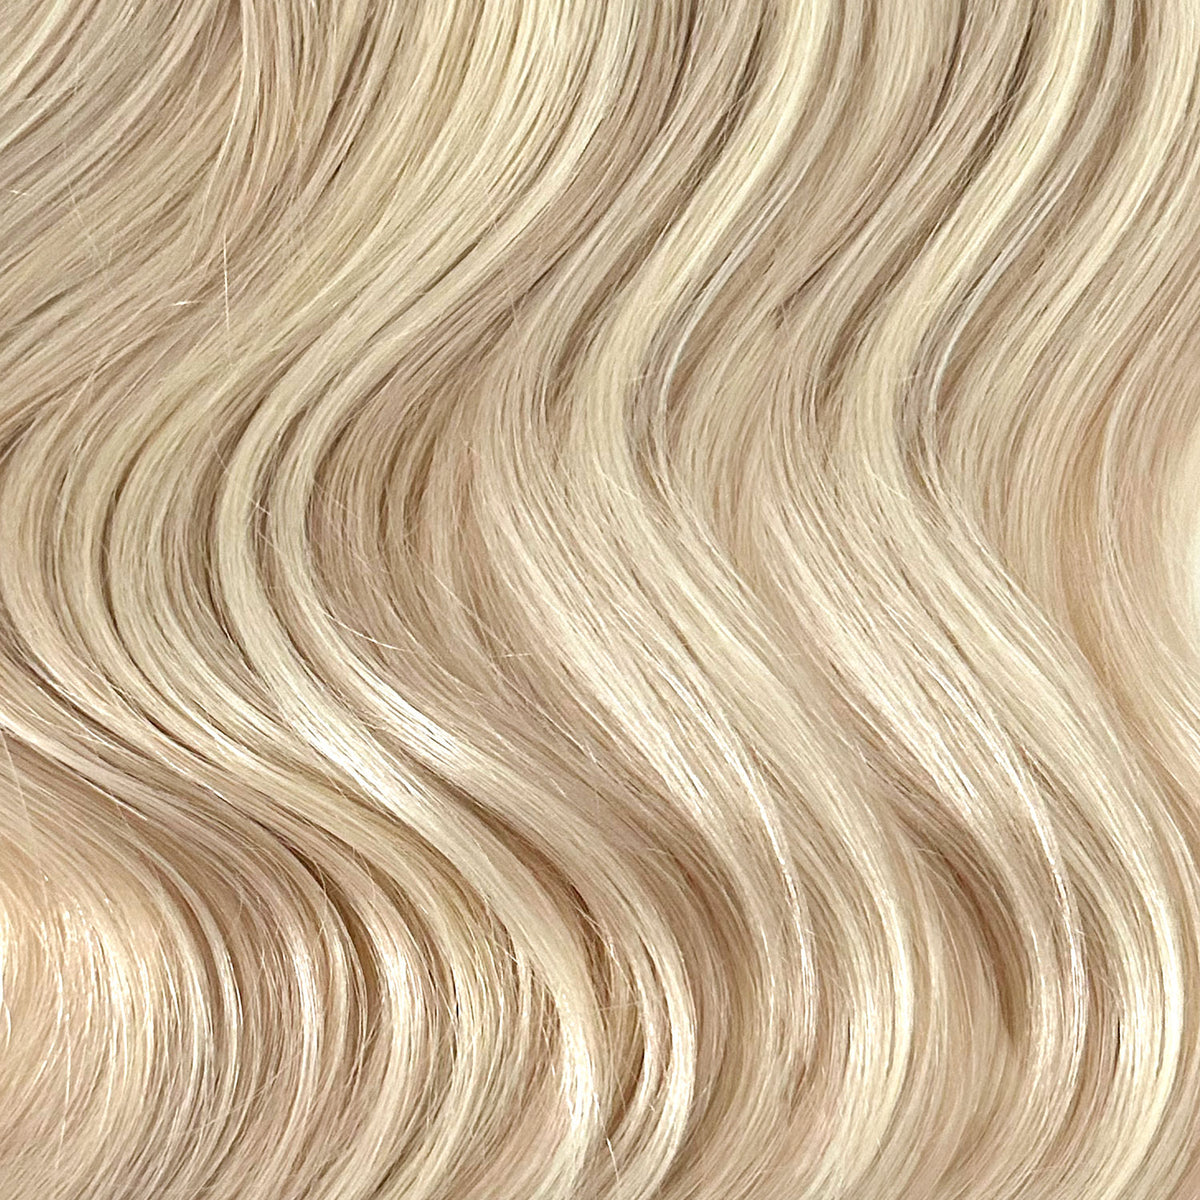 Tape In Hair Extensions #18a/60 Ash Blonde Platinum Blonde 17"